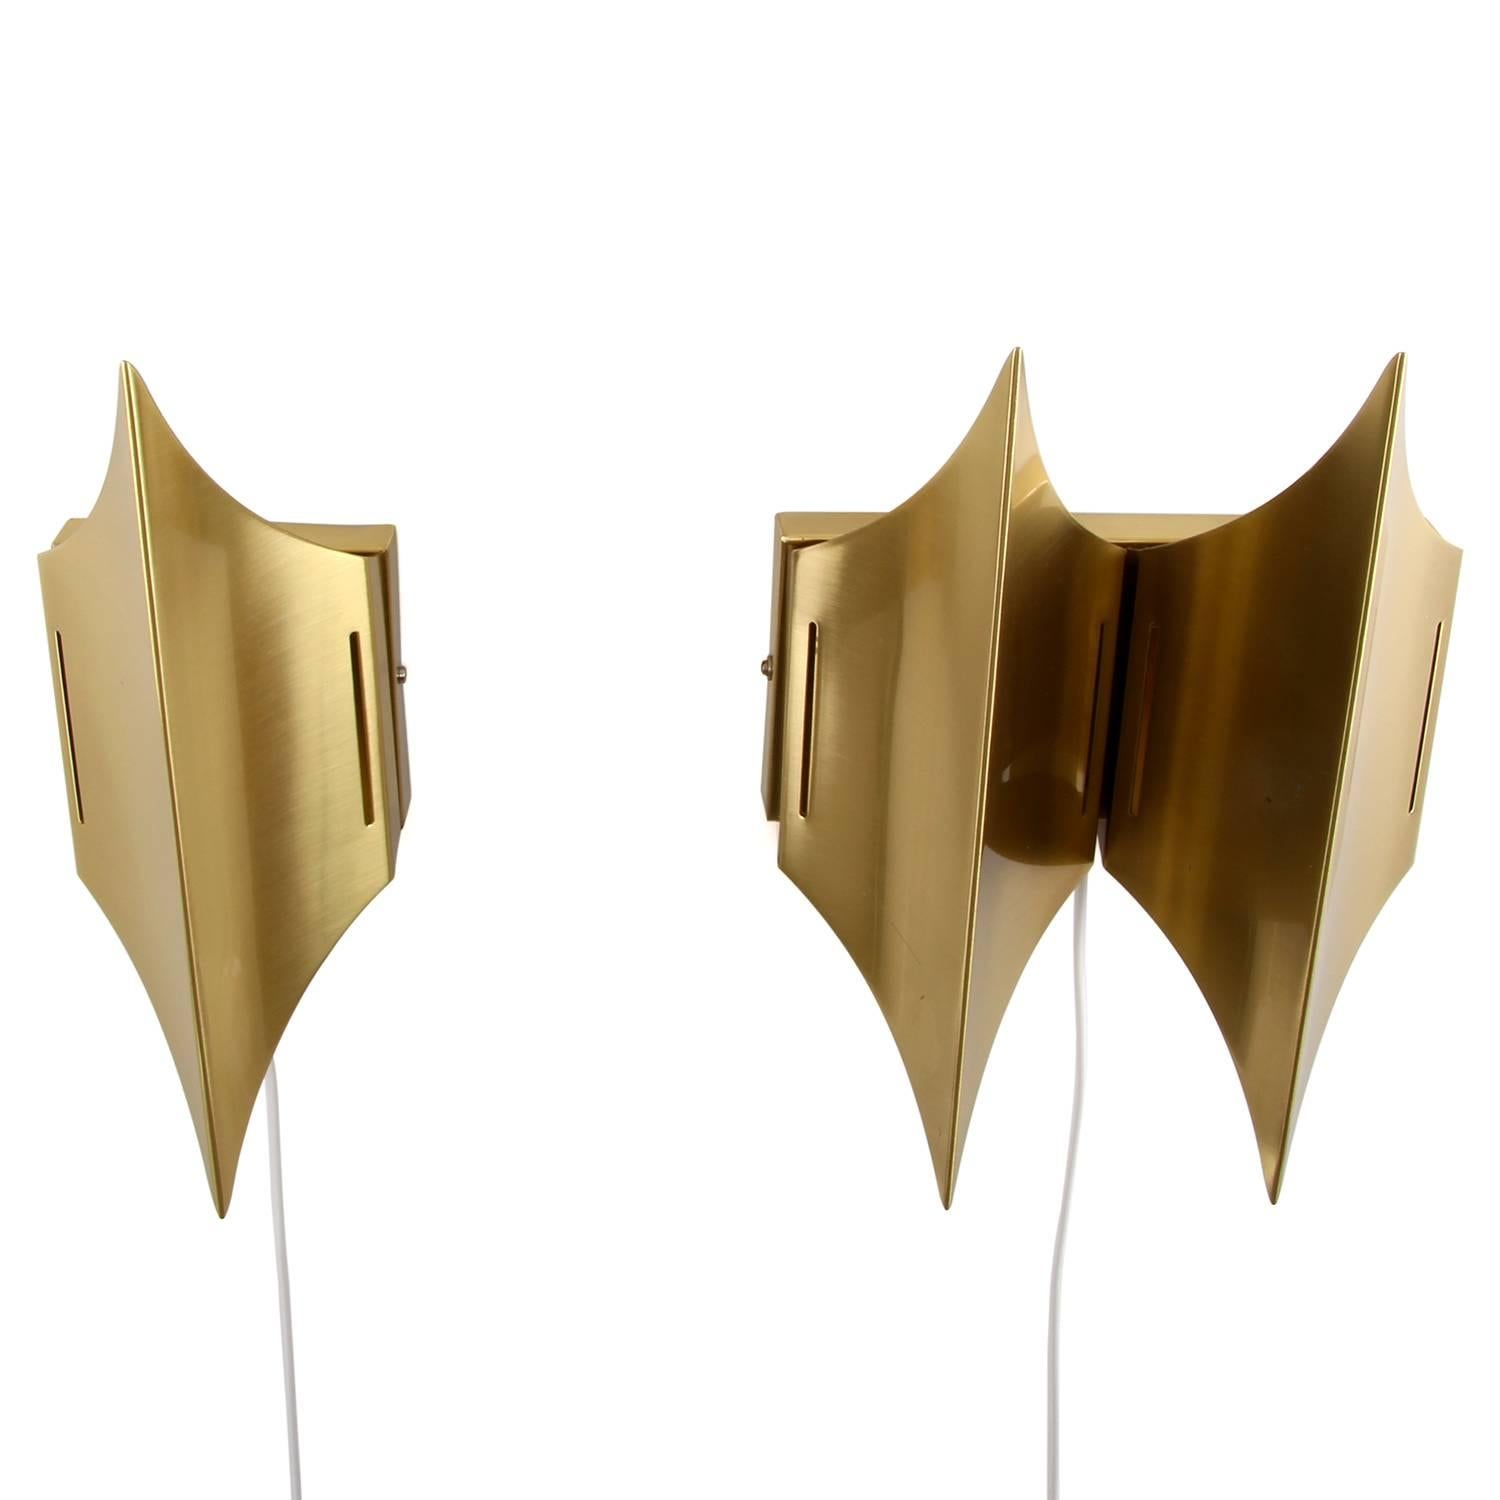 Danish Gothic 1 + 2 - Set of Two Extremely Stylish Brass Wall Lights by Lyfa, 1970s